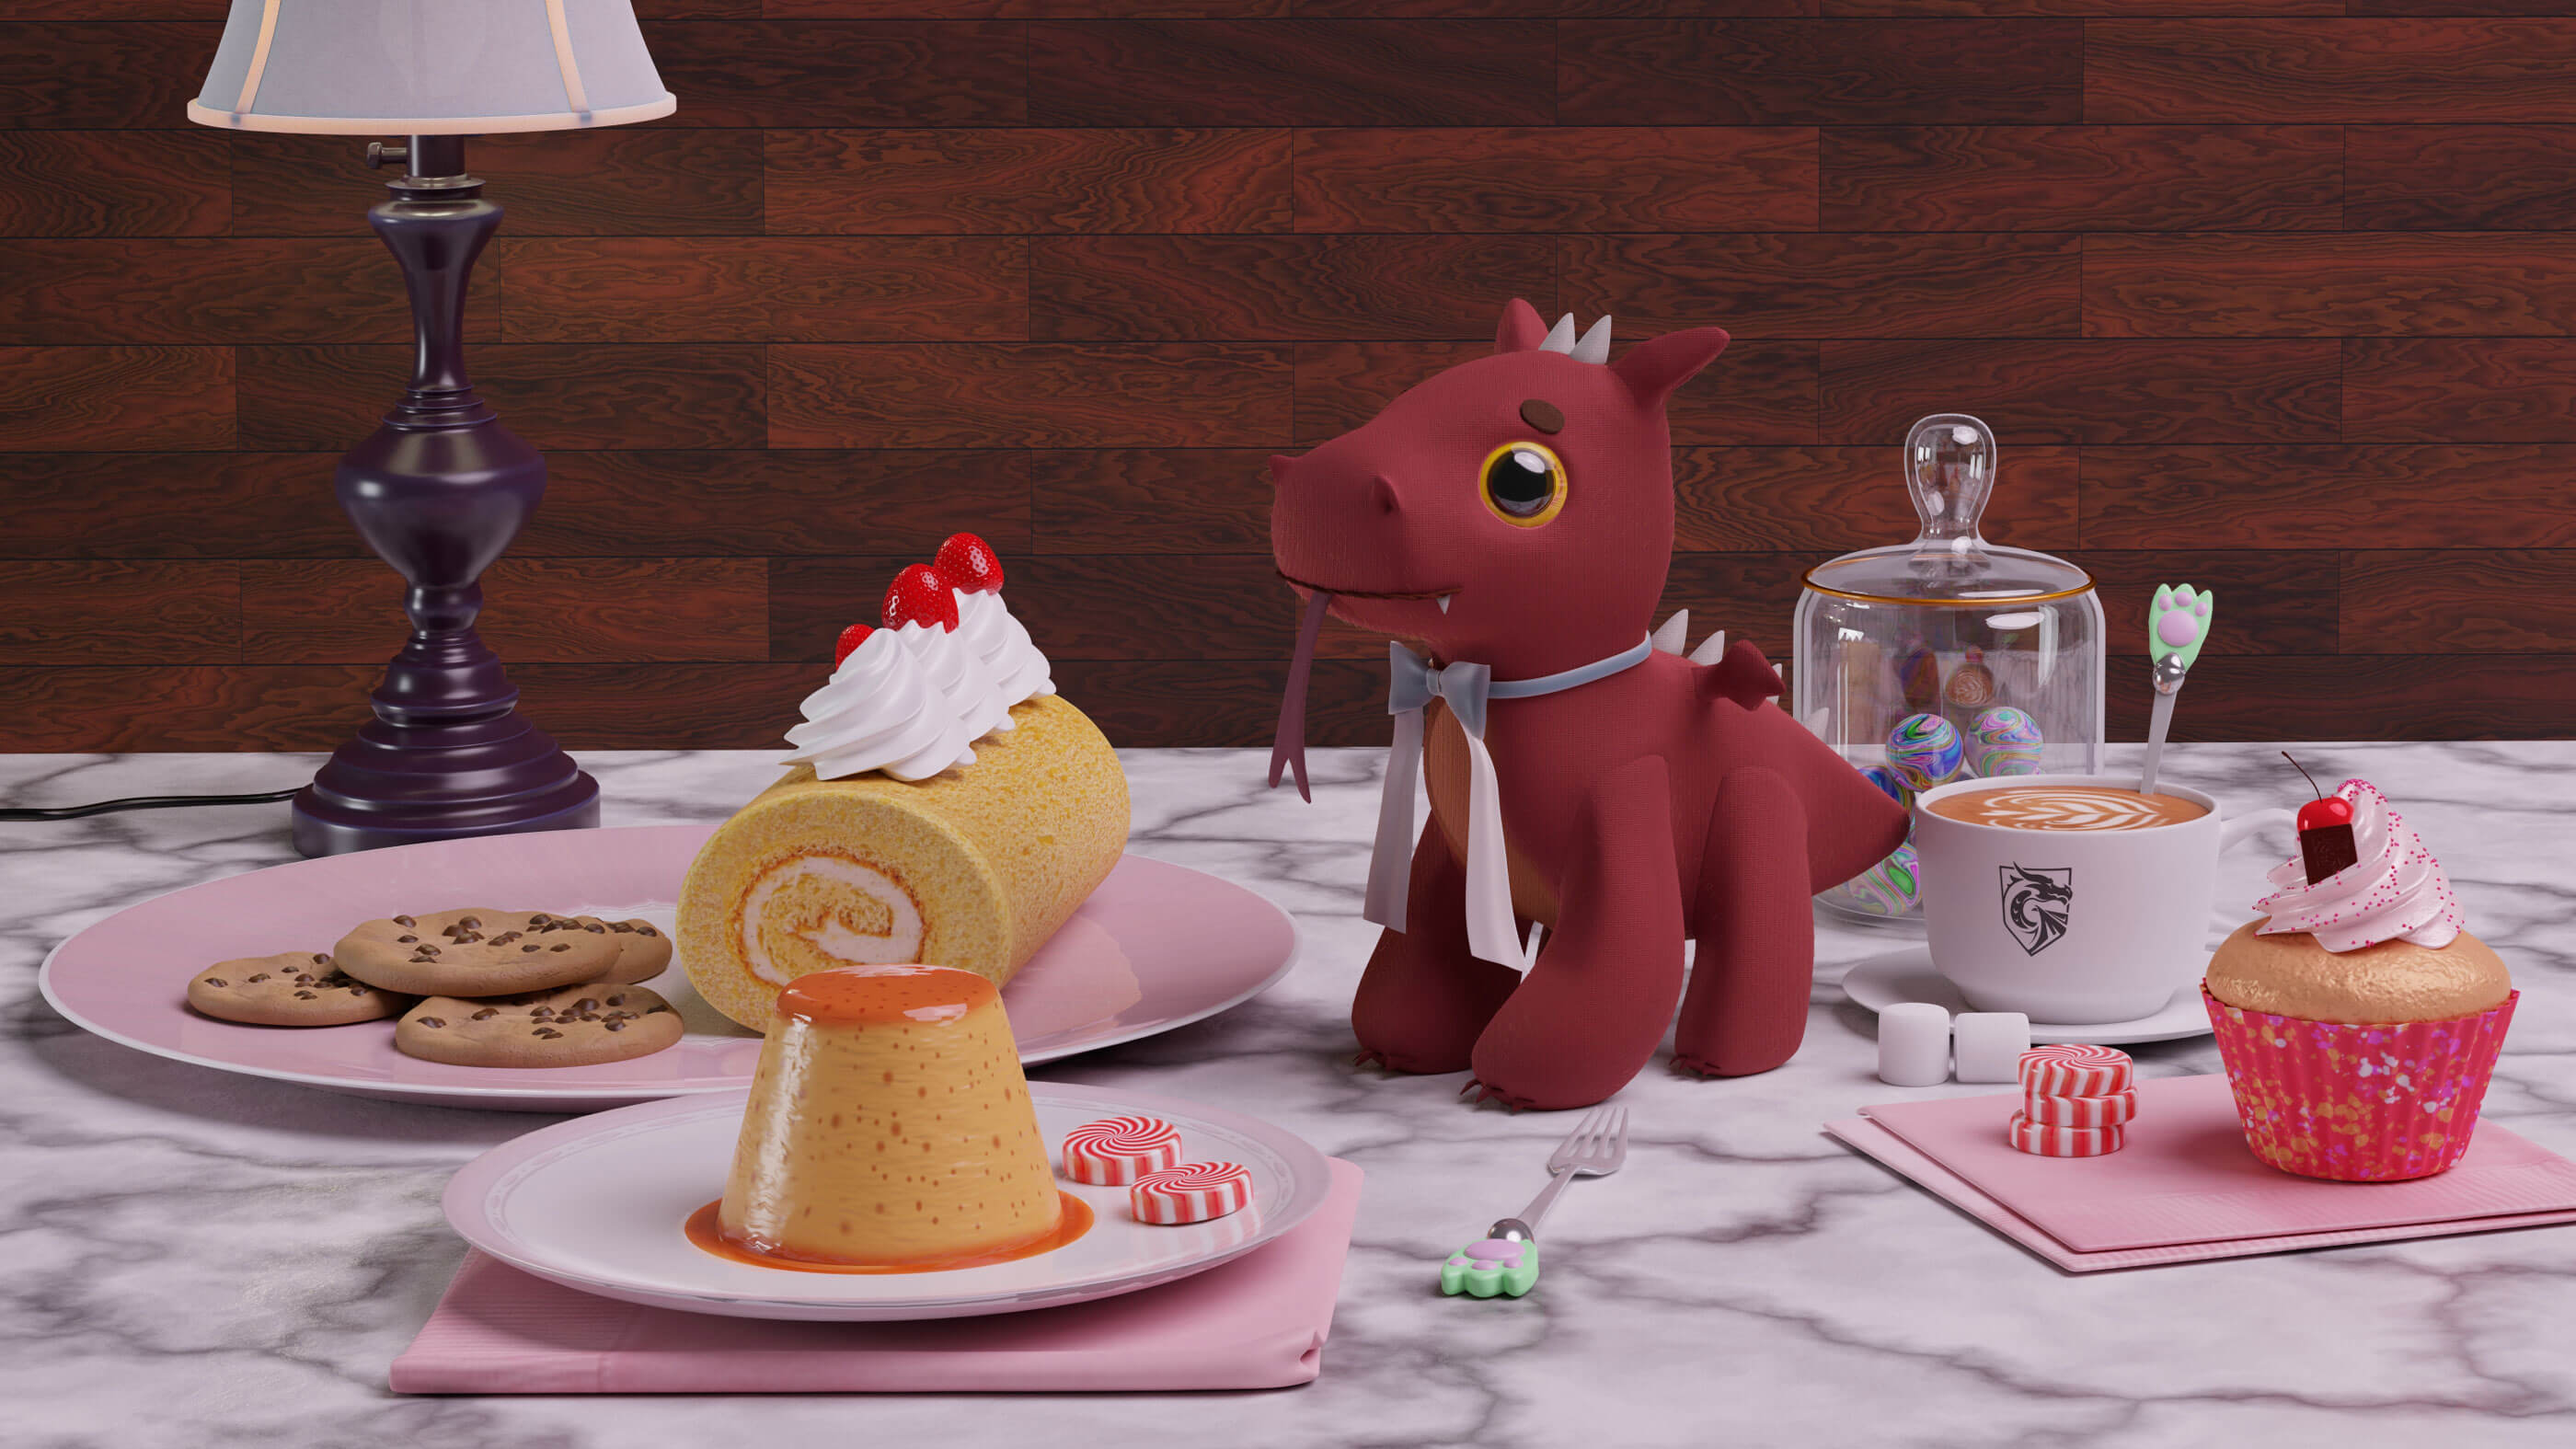 A table with a plush dragon, cookies, candy, and other sweets.